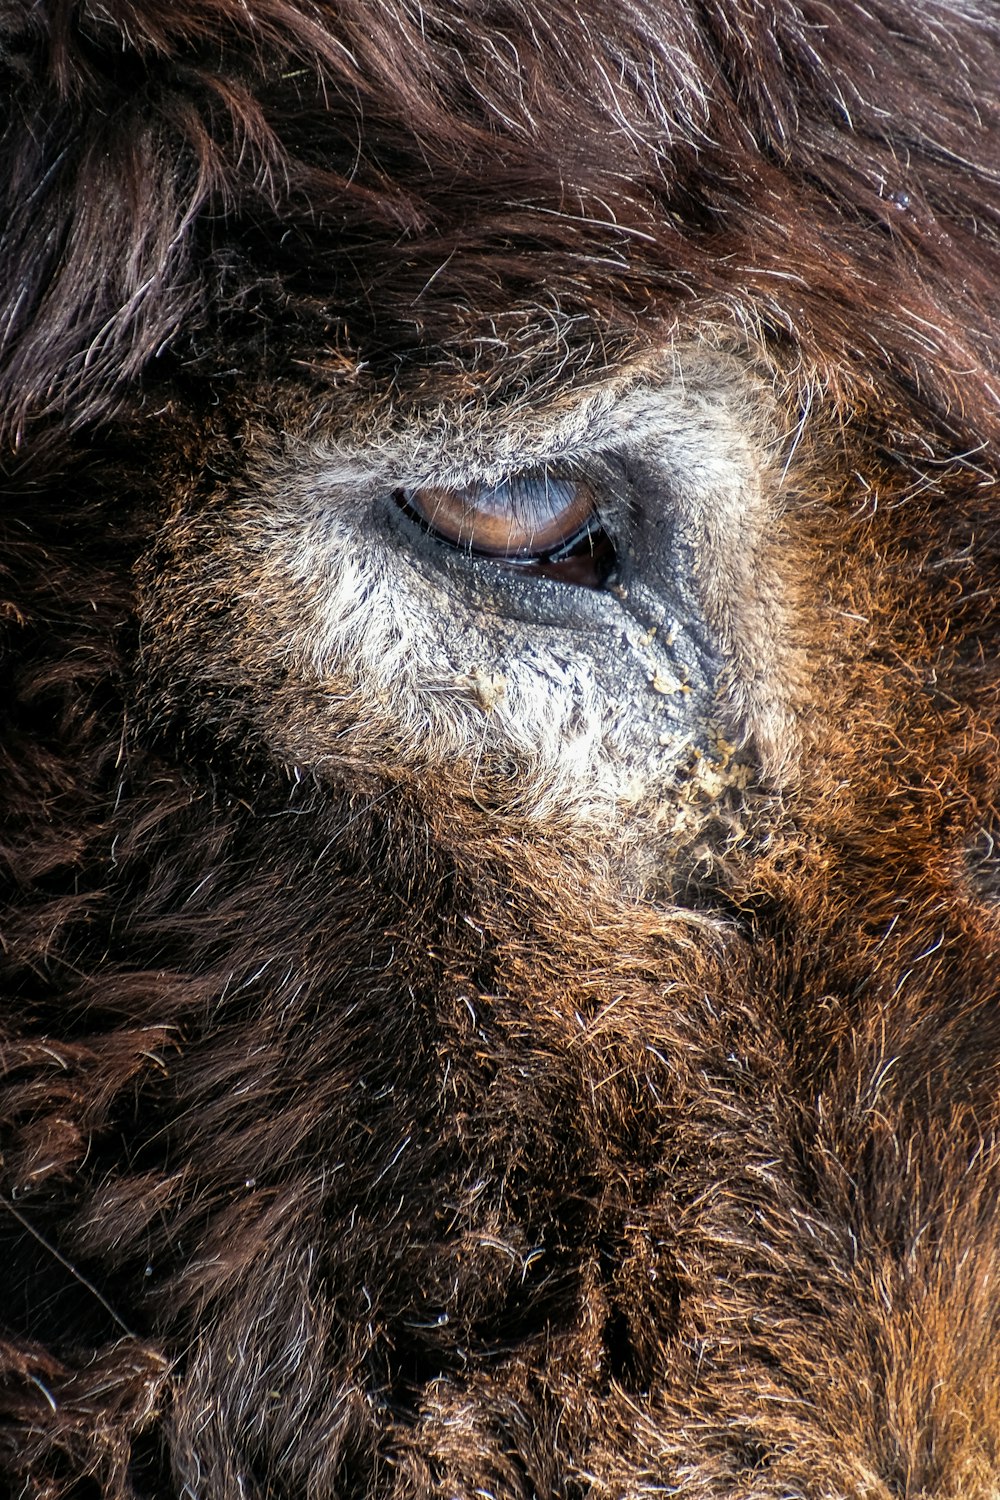 a close up of the eye of a bison